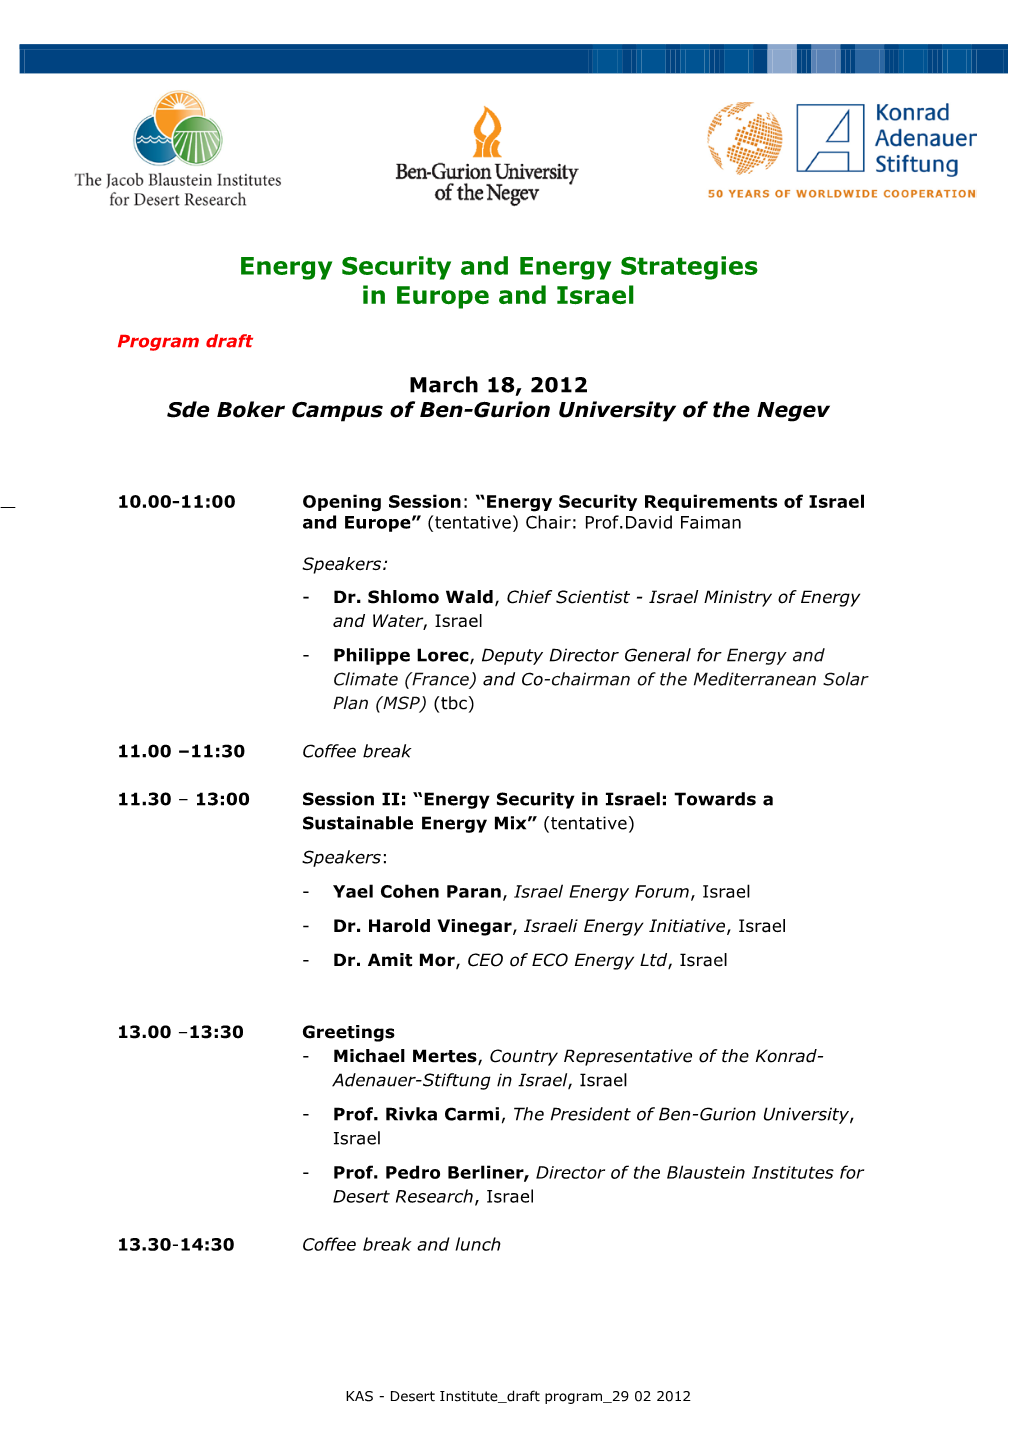 Energy Security and Energy Strategies in Europe and Israel